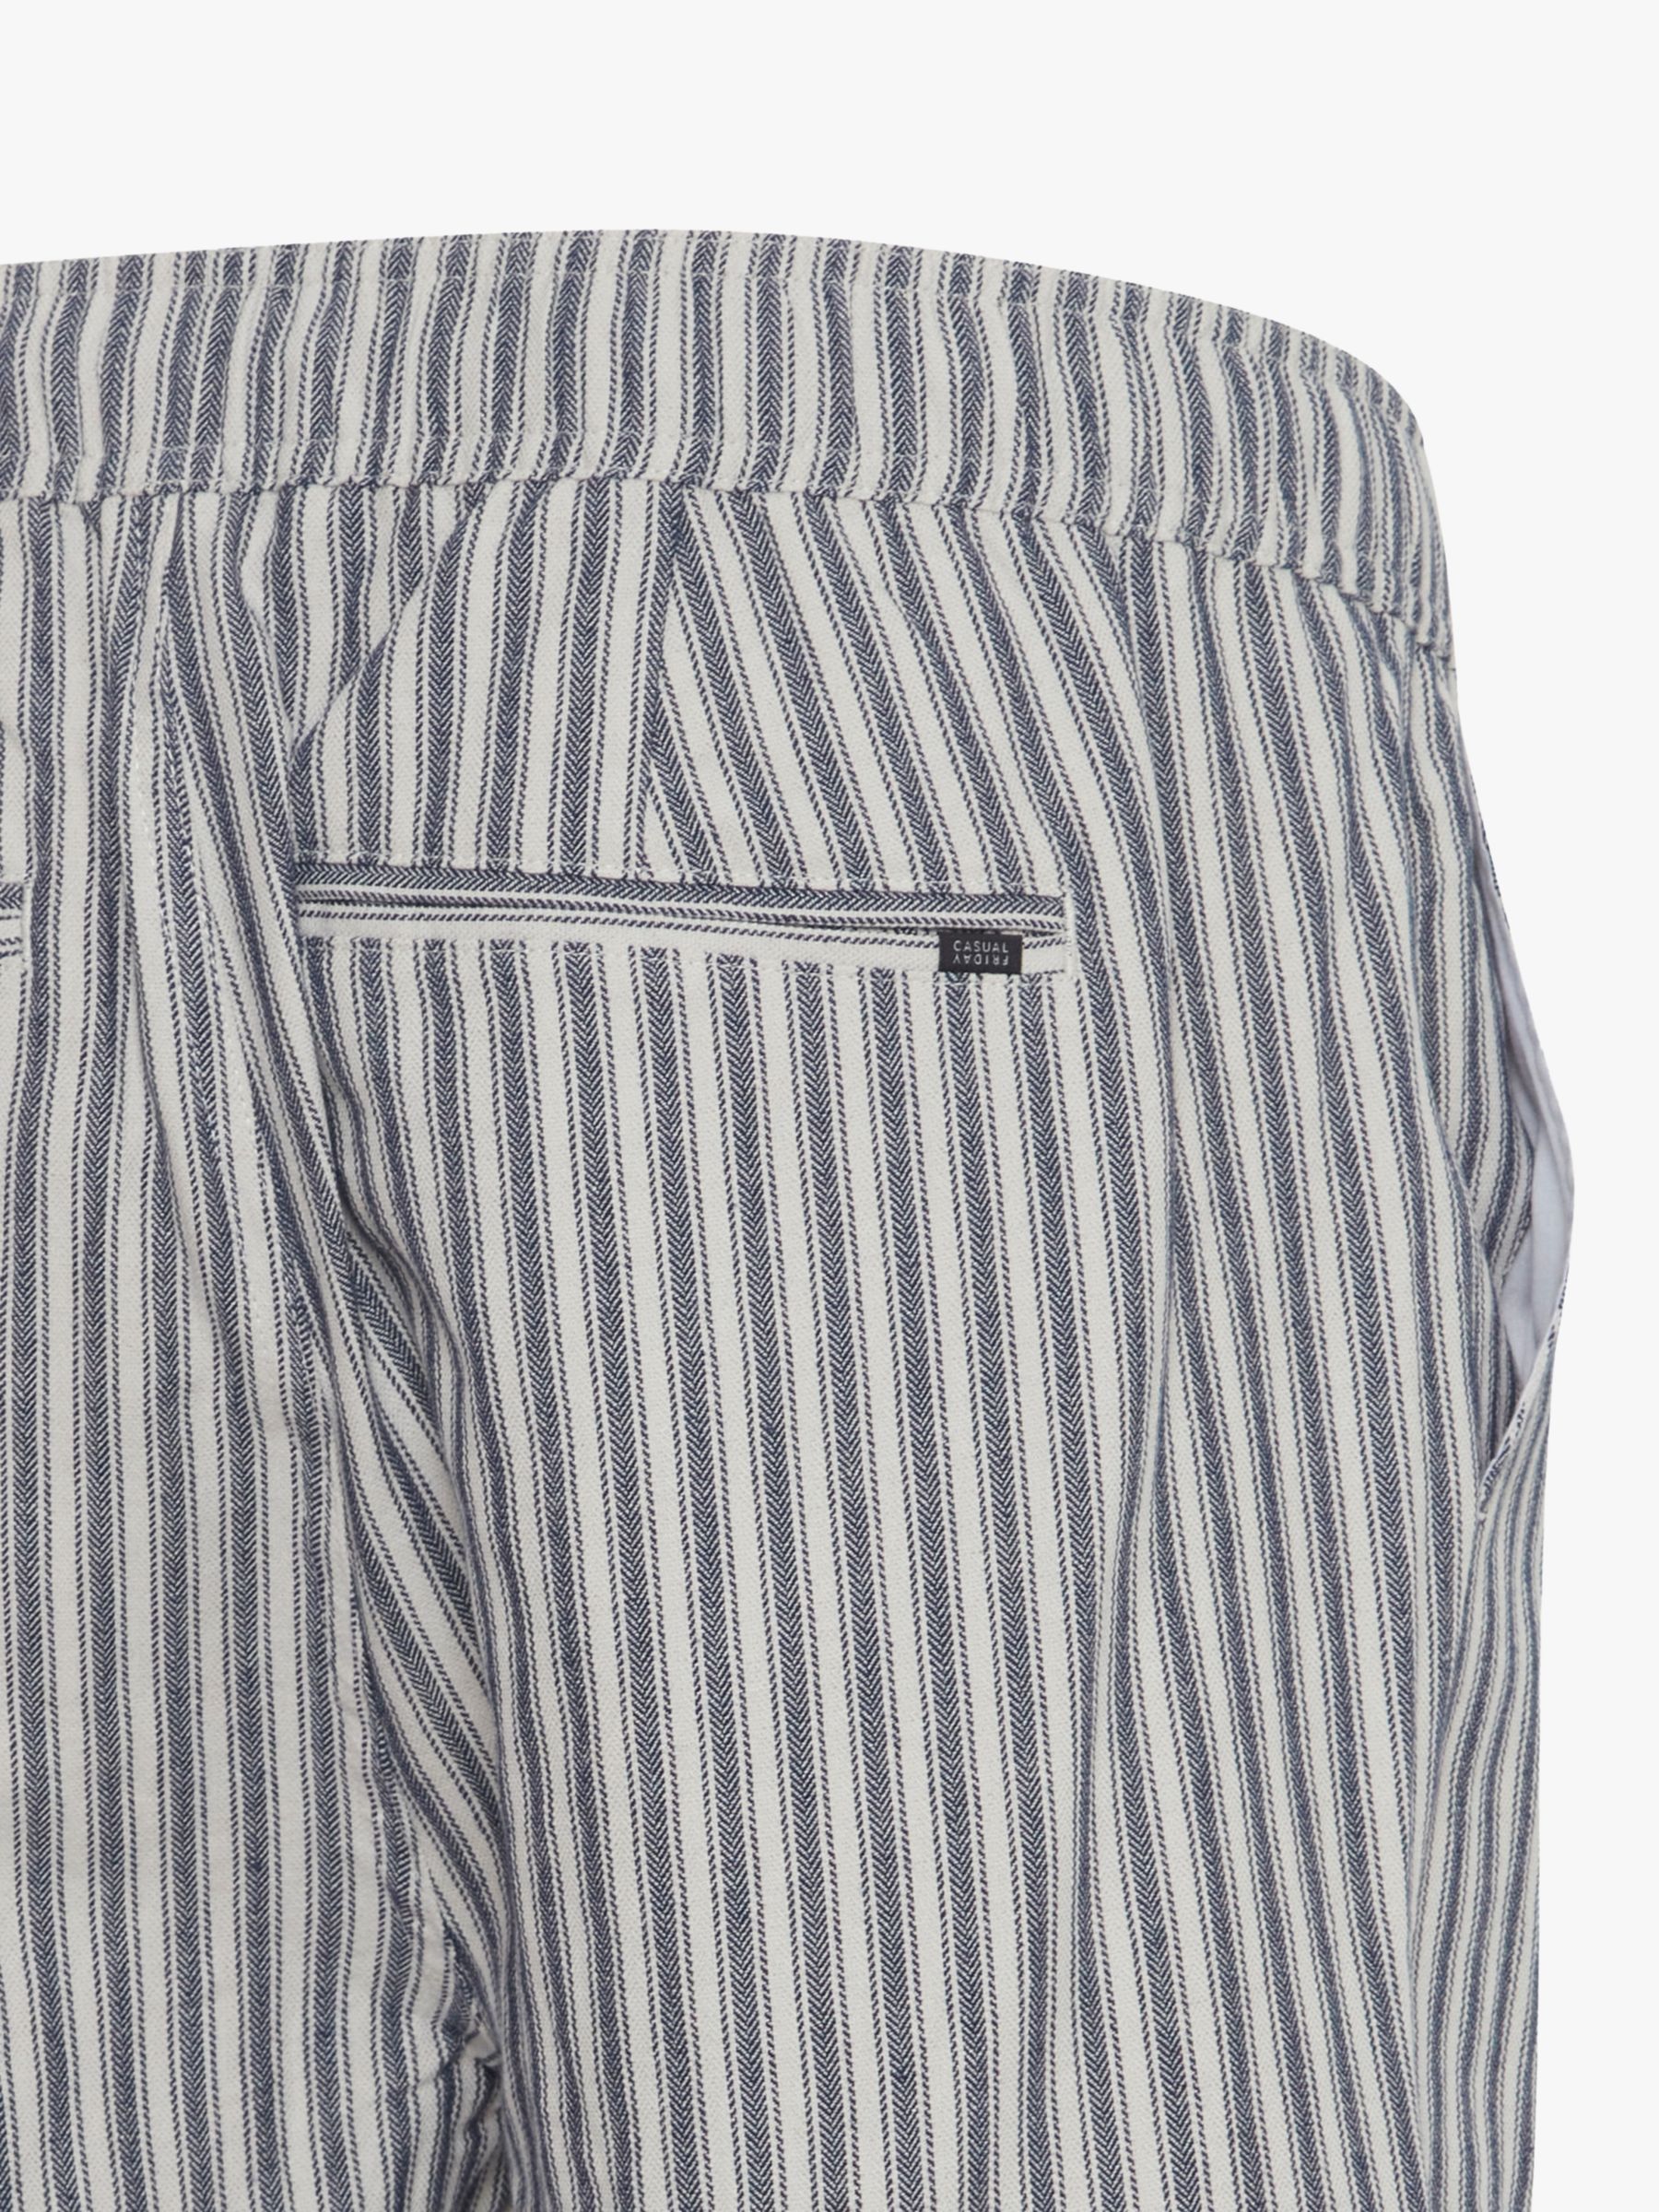 Buy Casual Friday Phelix Linen Mix Striped Shorts, Navy/White Online at johnlewis.com